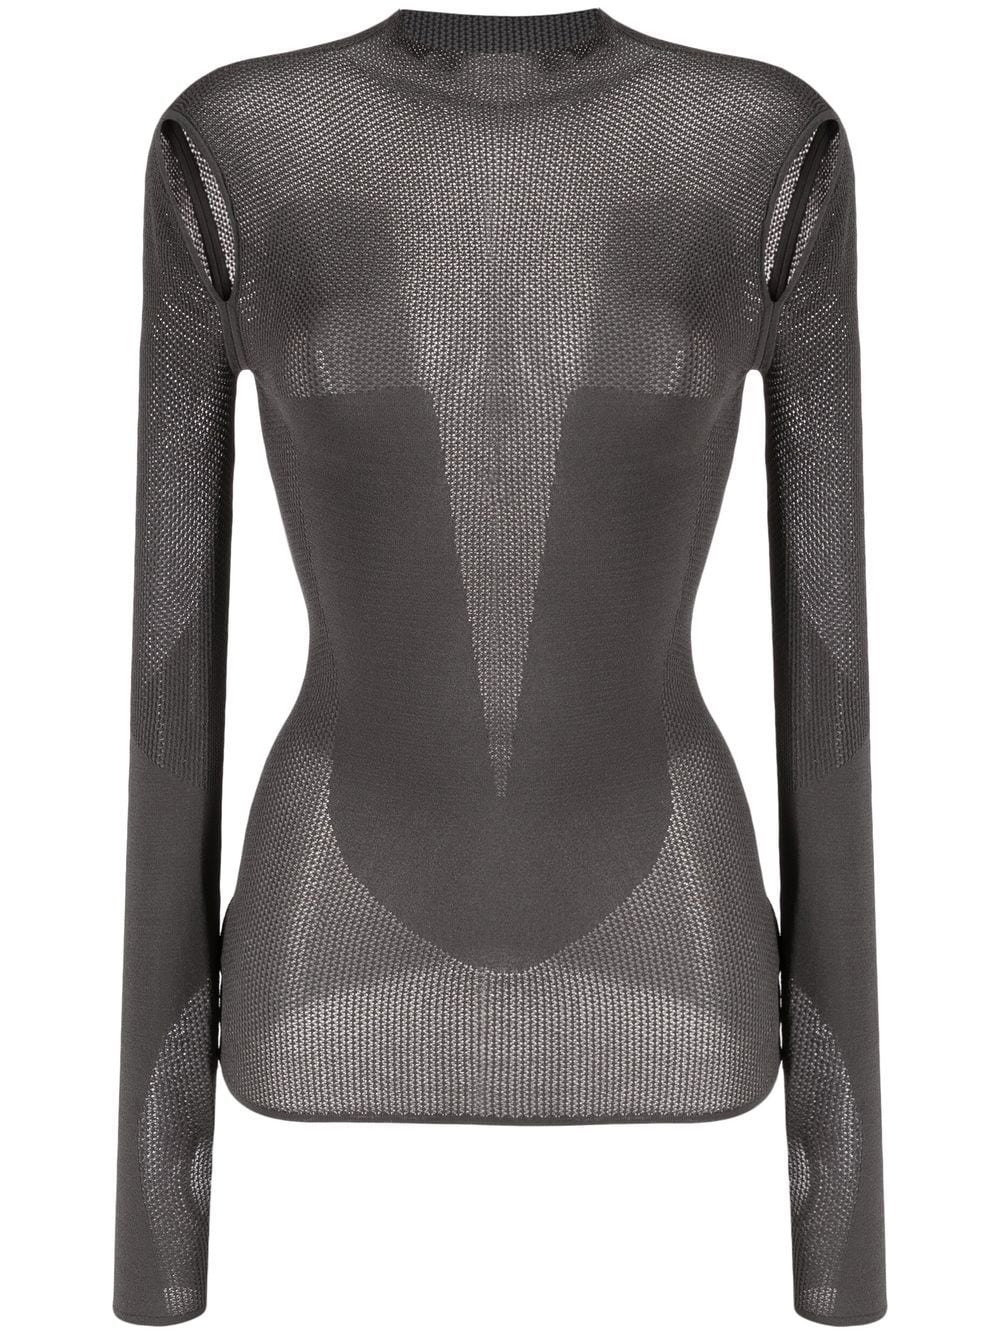 Dion Lee cut-out detail long-sleeved top - Grey